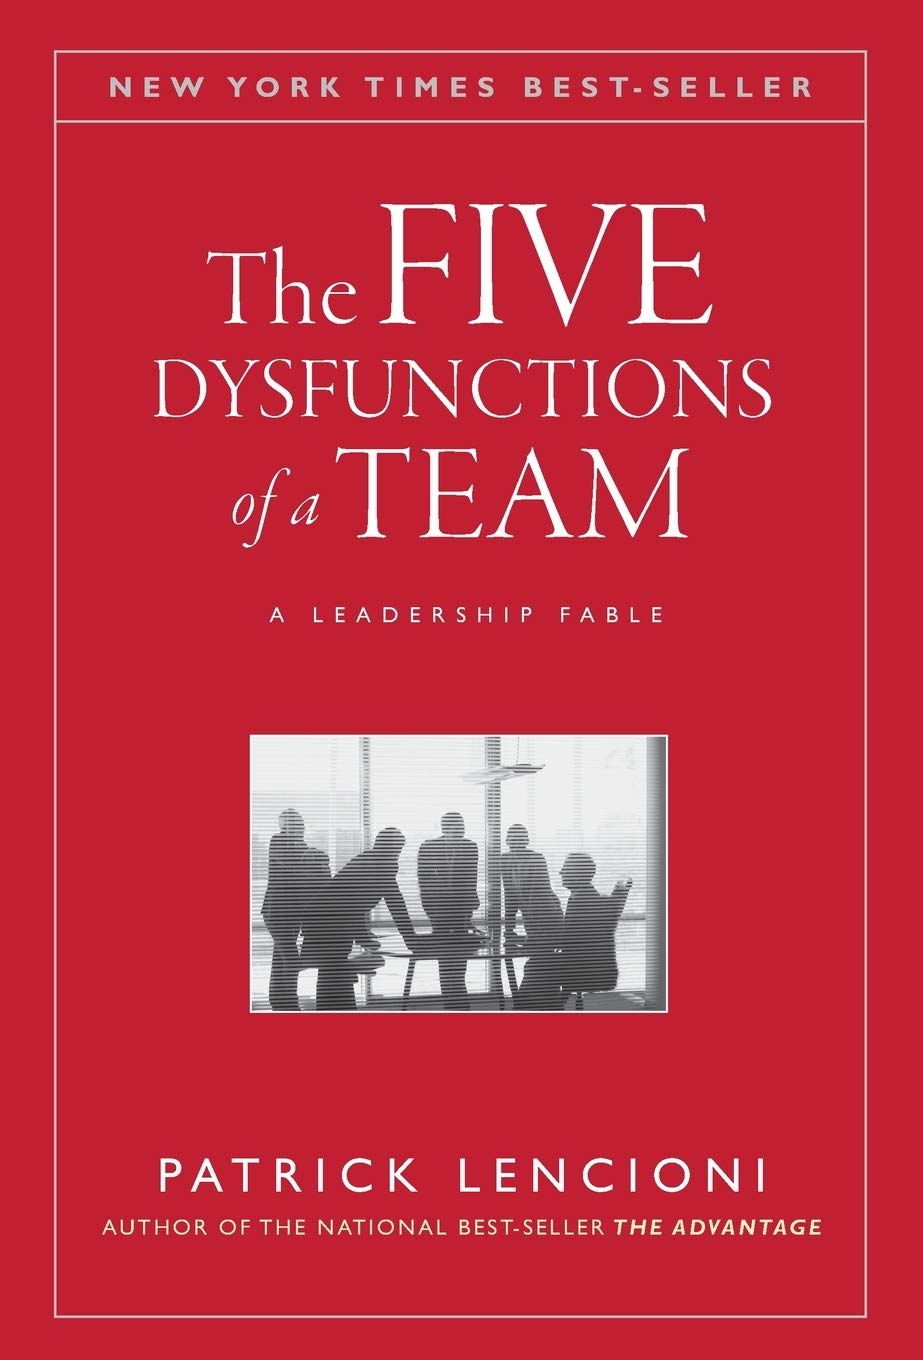 DoF Bookclub: The Five Dysfunctions of a Team